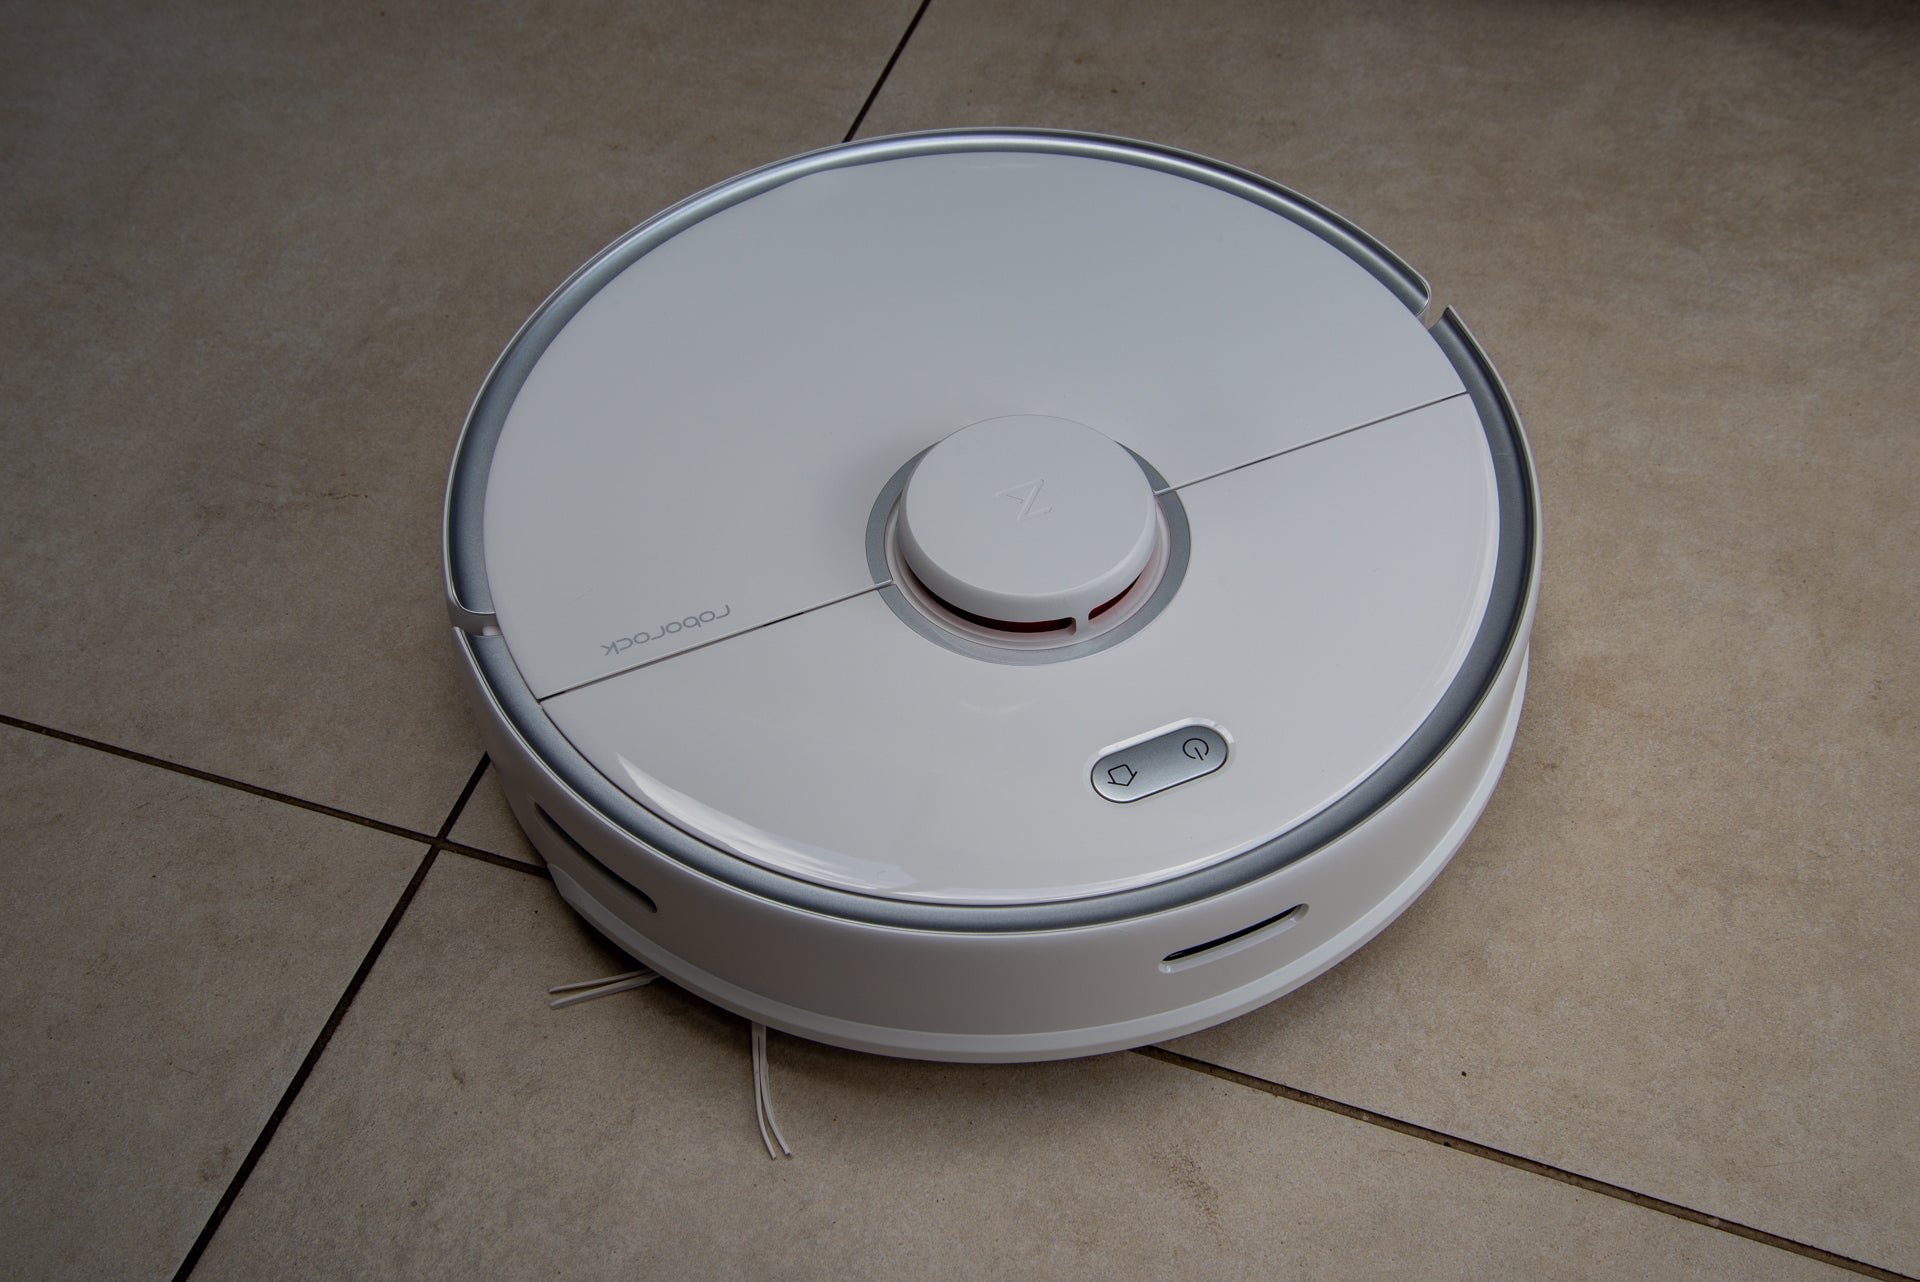 Best robot vacuum cleaner 2022: Clean carpets, hard floors and mop automatically